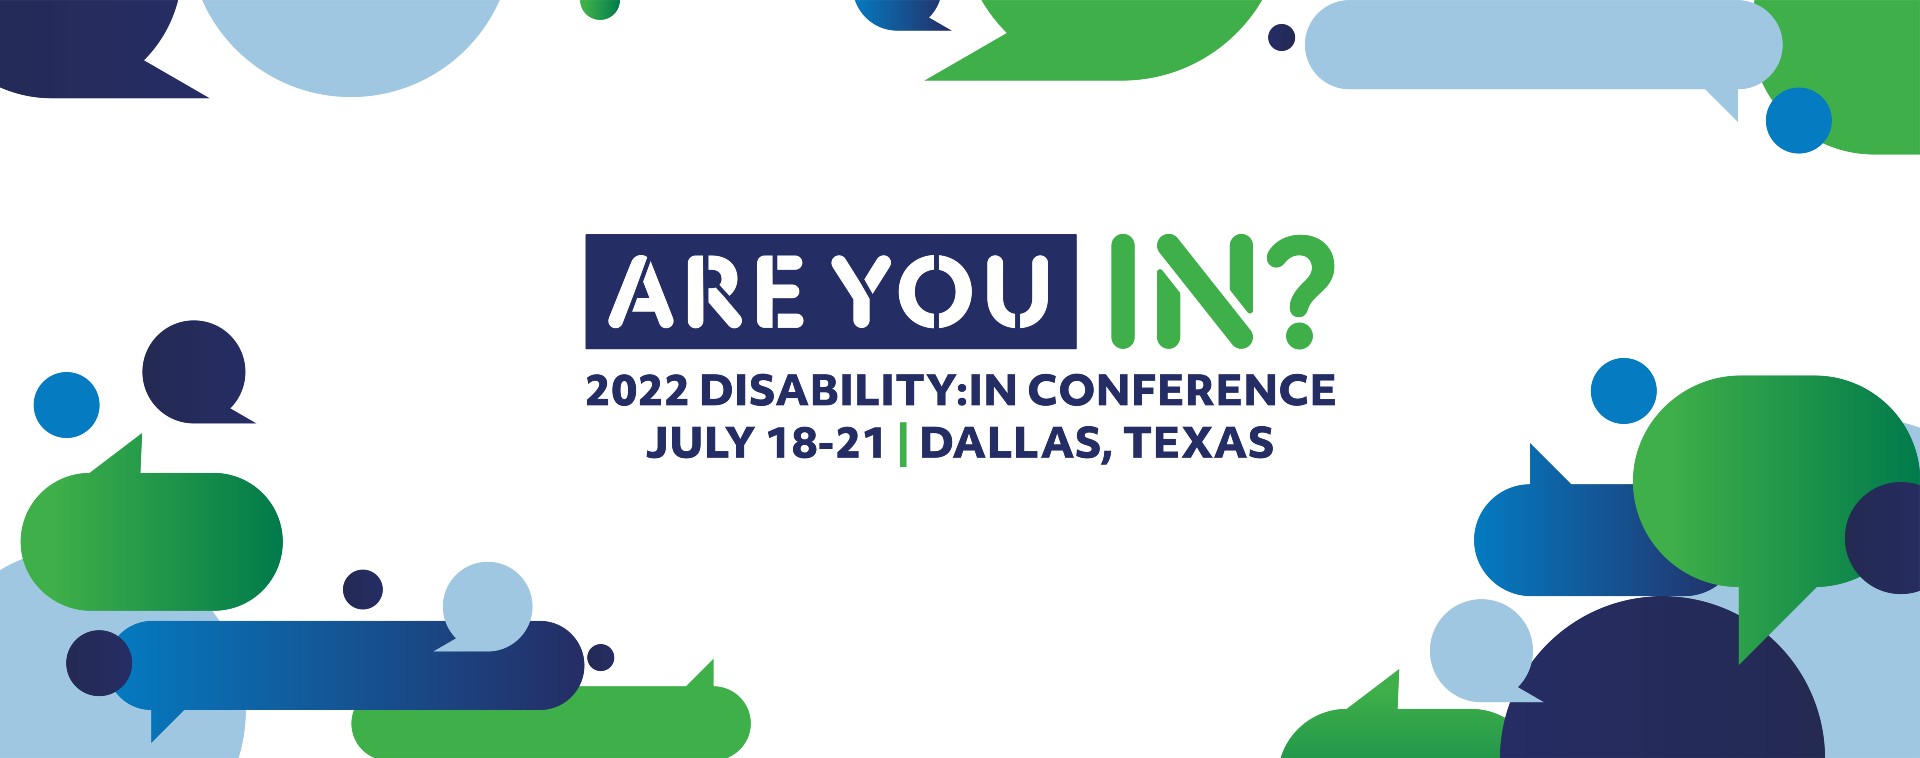 Are You IN? 2022 Disability:IN Global Conference & Expo on July 18-21 in Dallas, Texas.